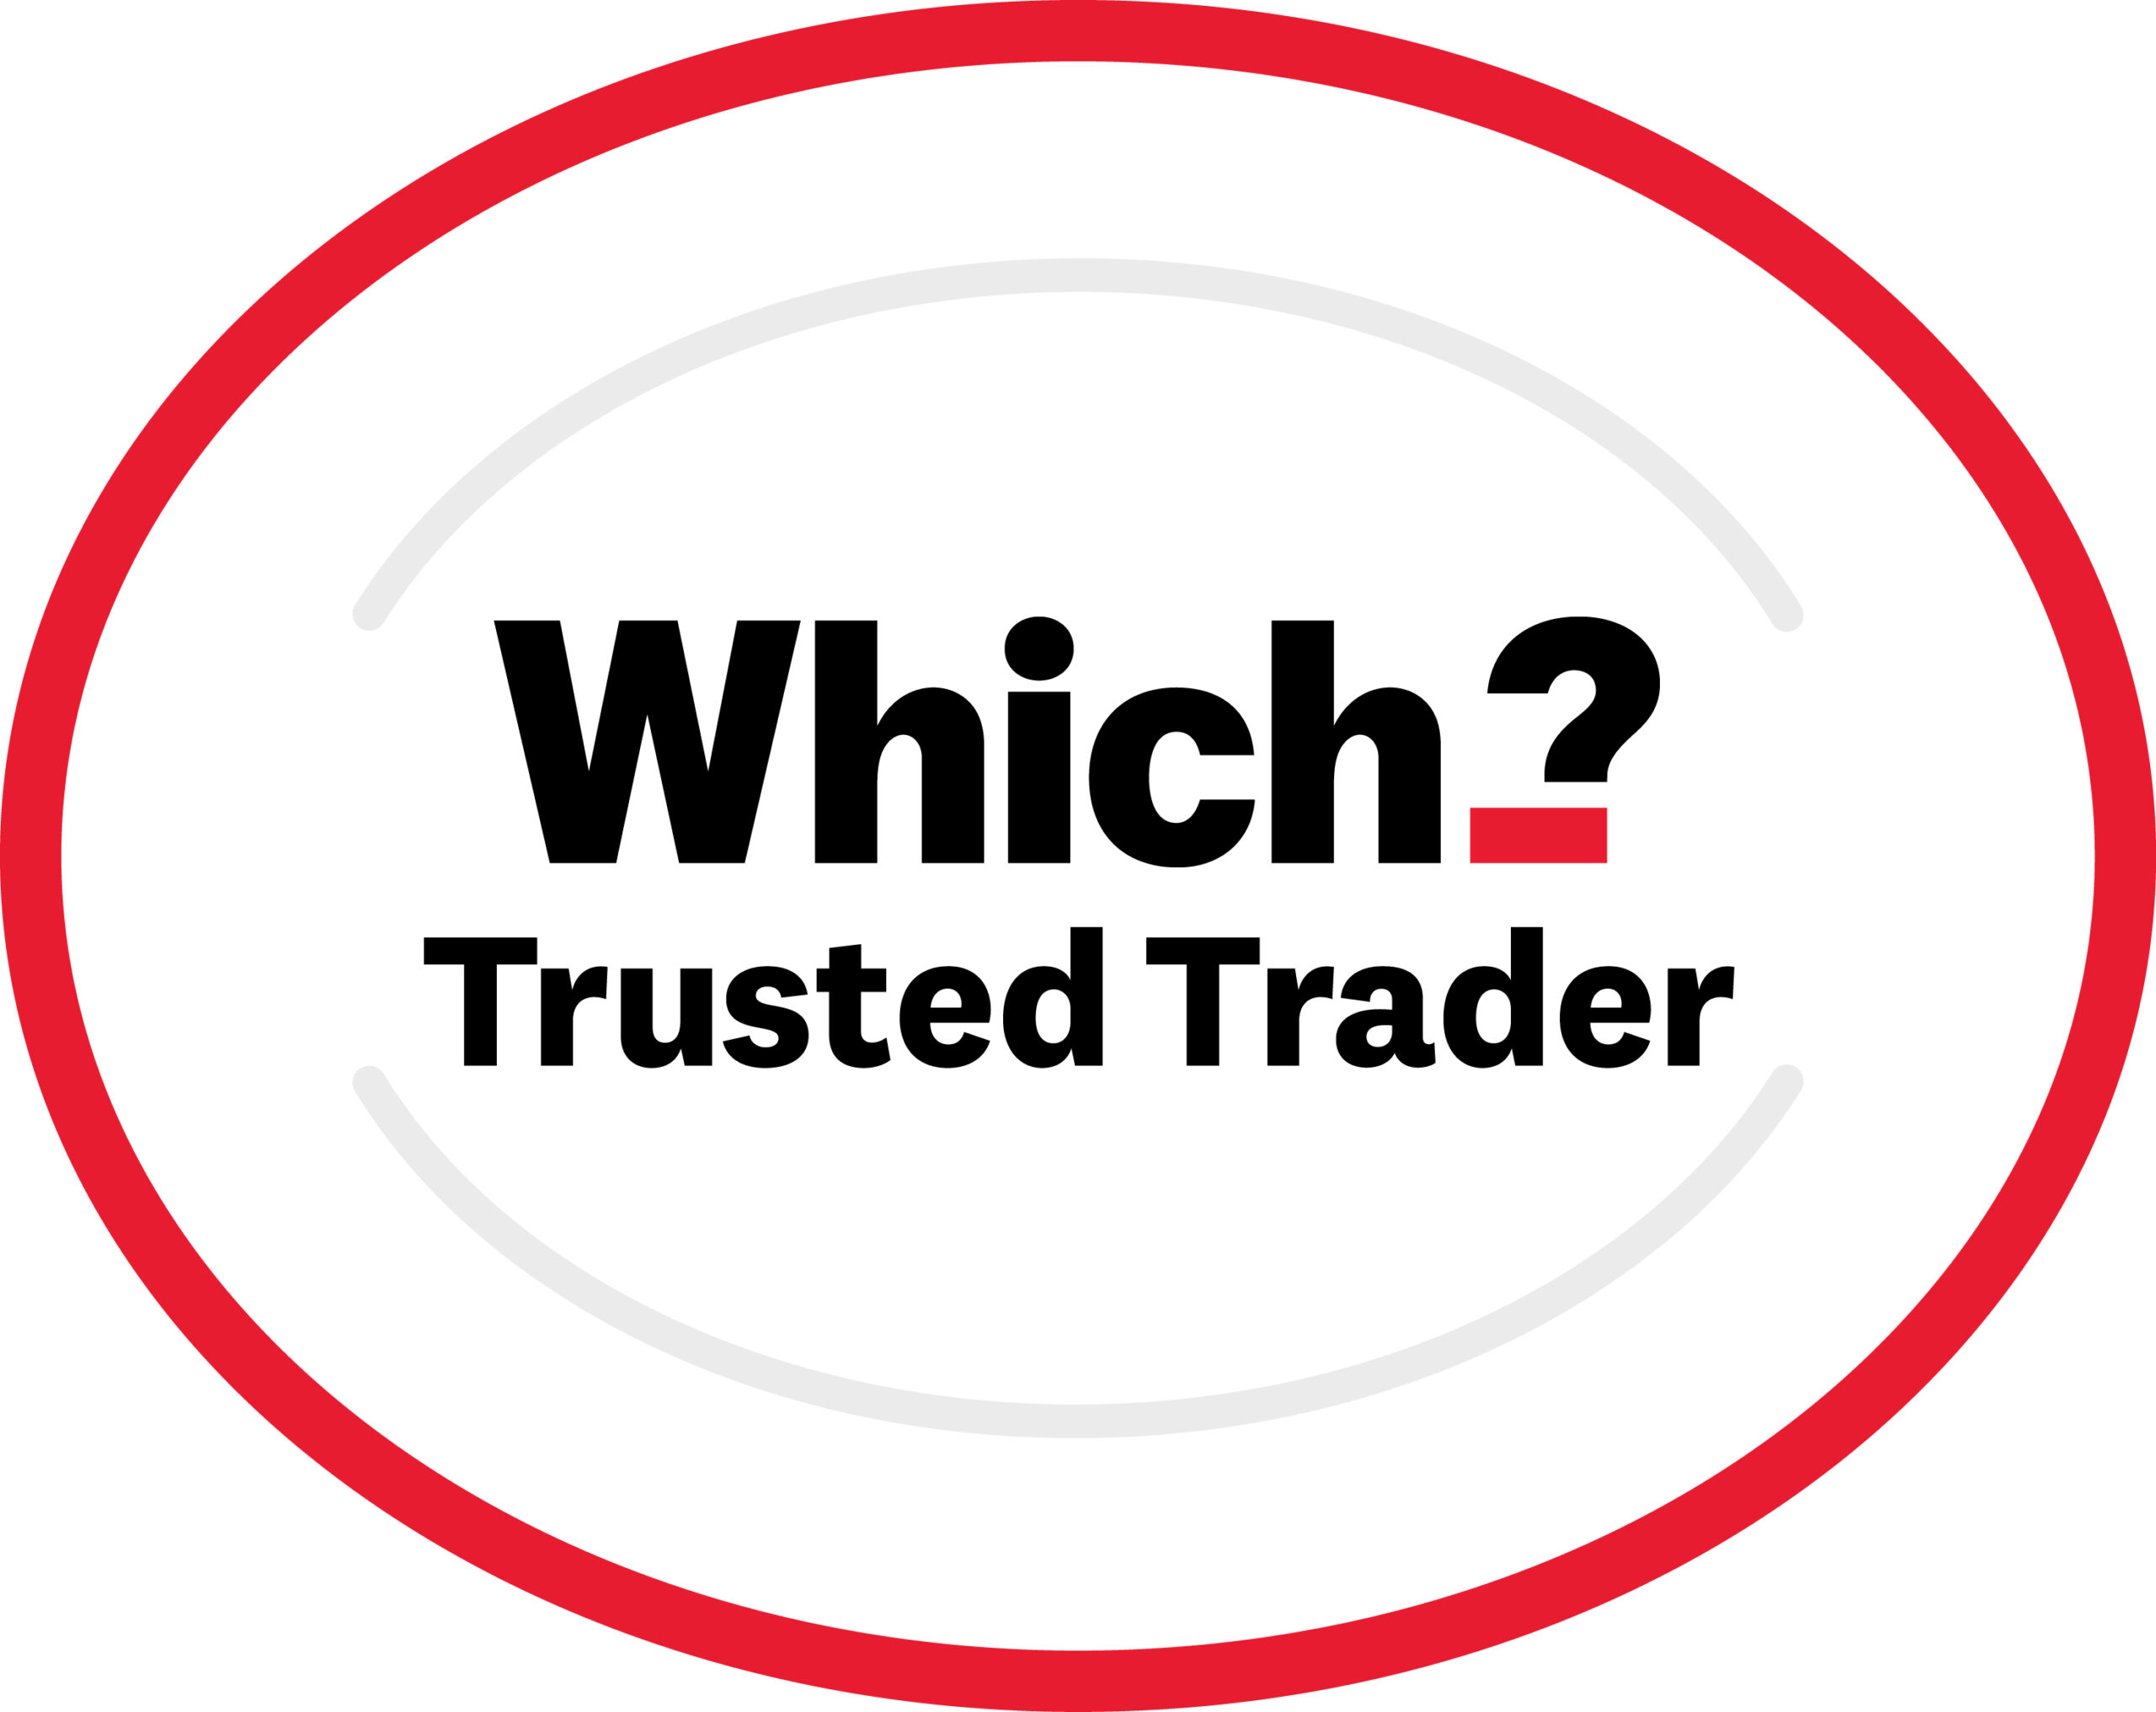 Mentor Lock is a Which Trusted Trader